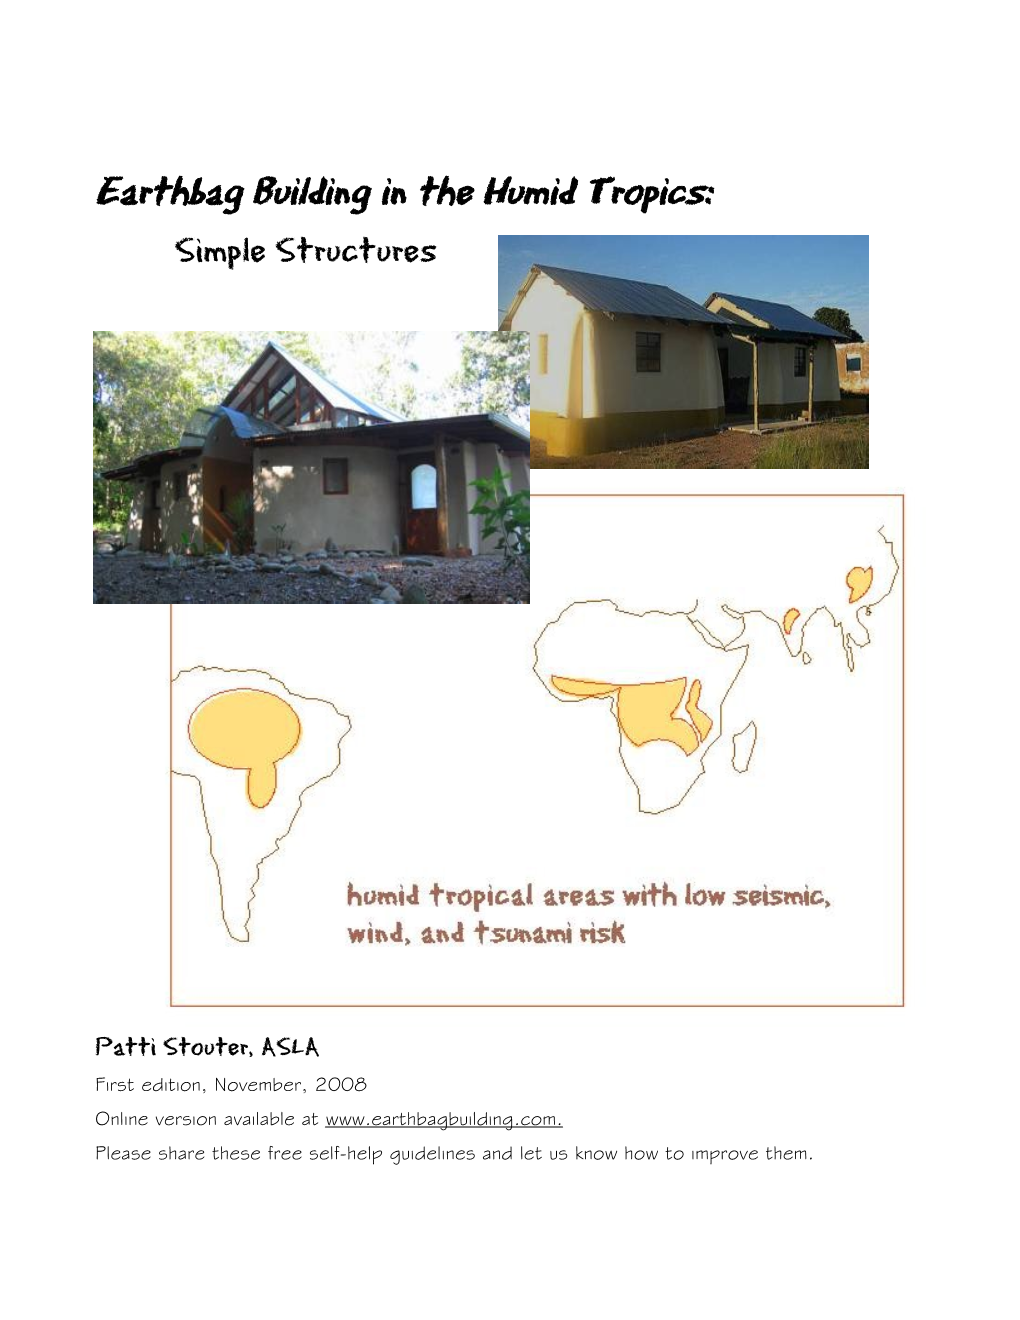 Earthbag Building in the Humid Tropics: Simple Structures